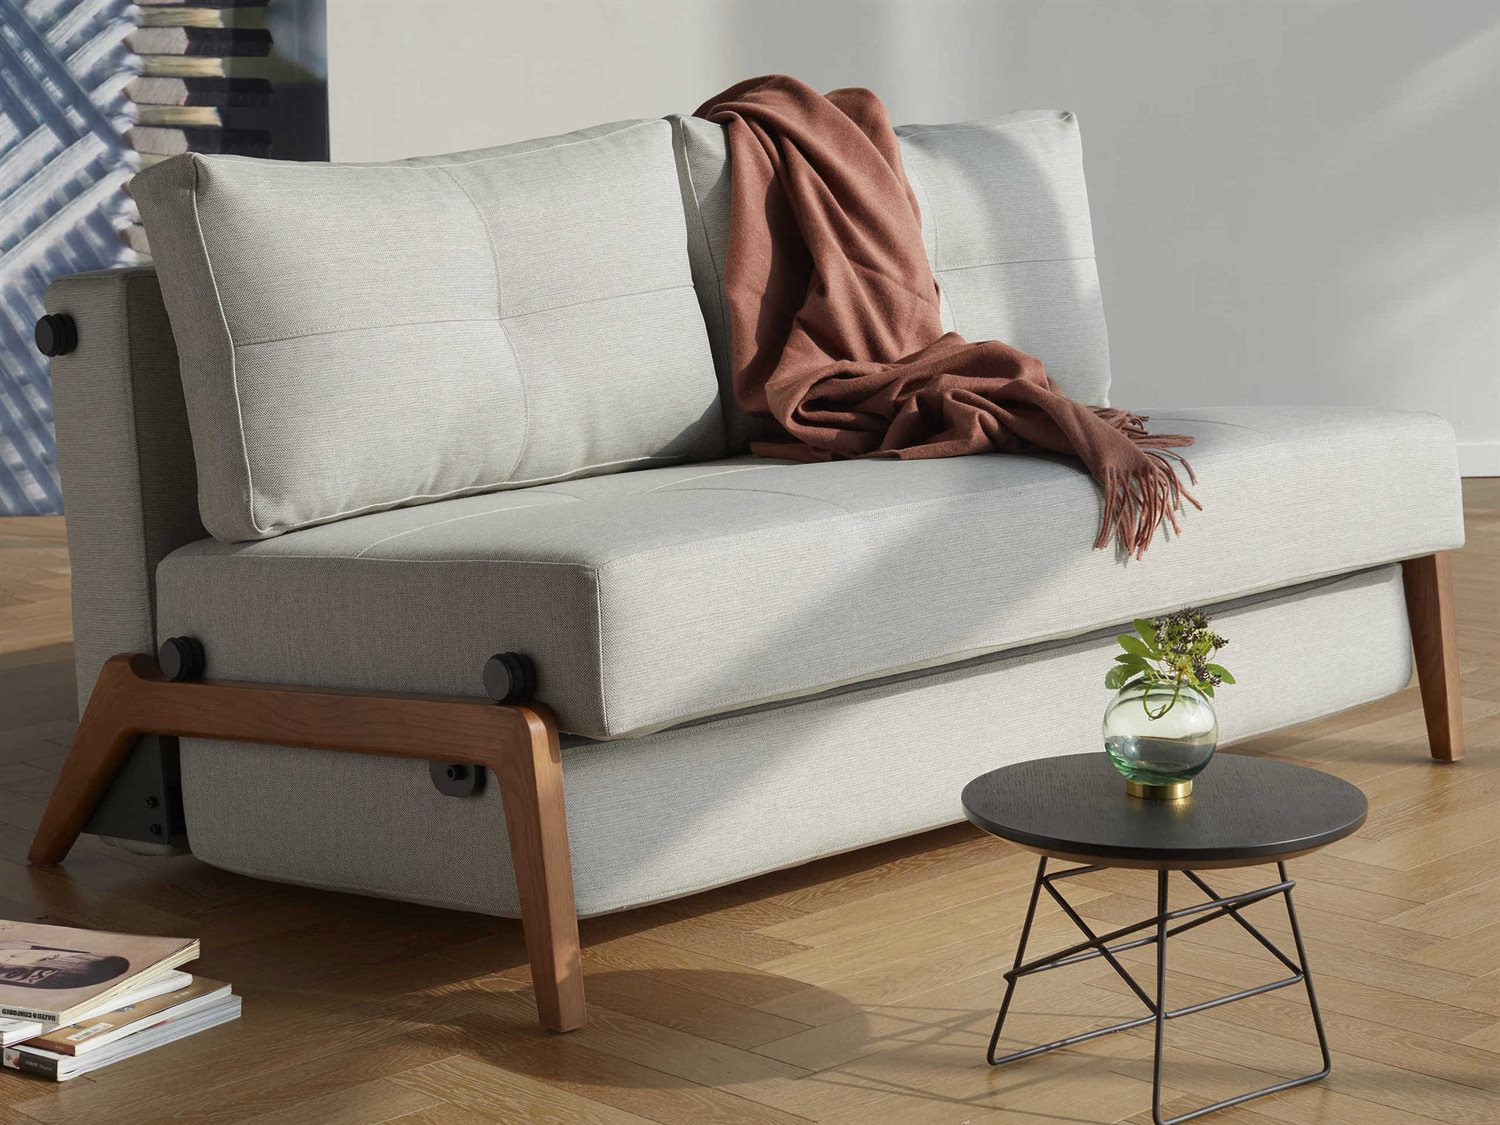 innovation usa cubed 02 sofa bed